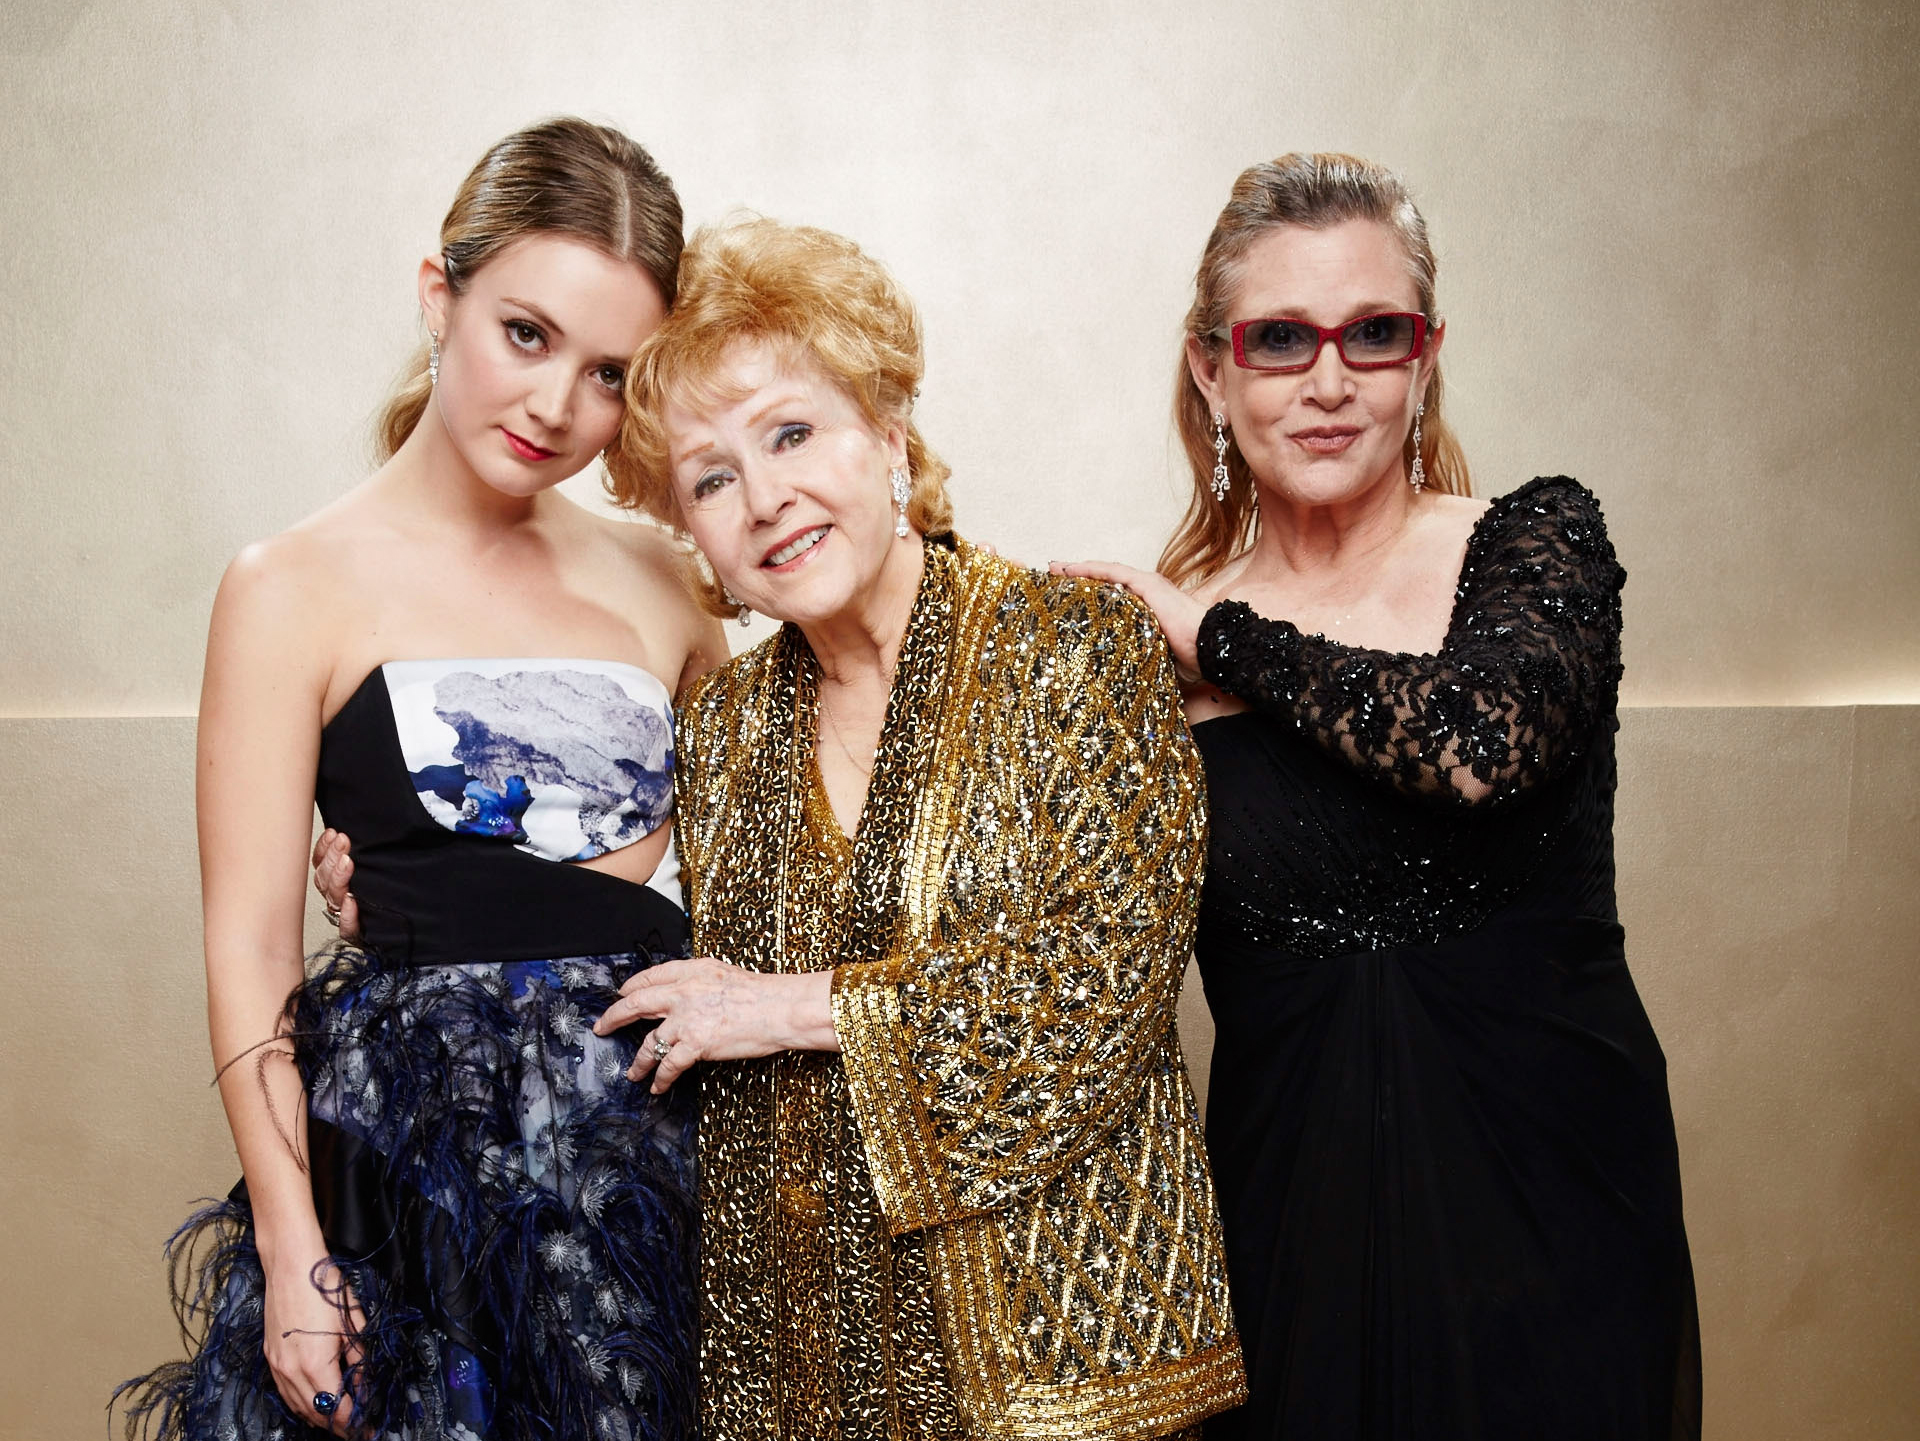 Billie Lourd's tribute to Carrie Fisher and Debbie Reynolds